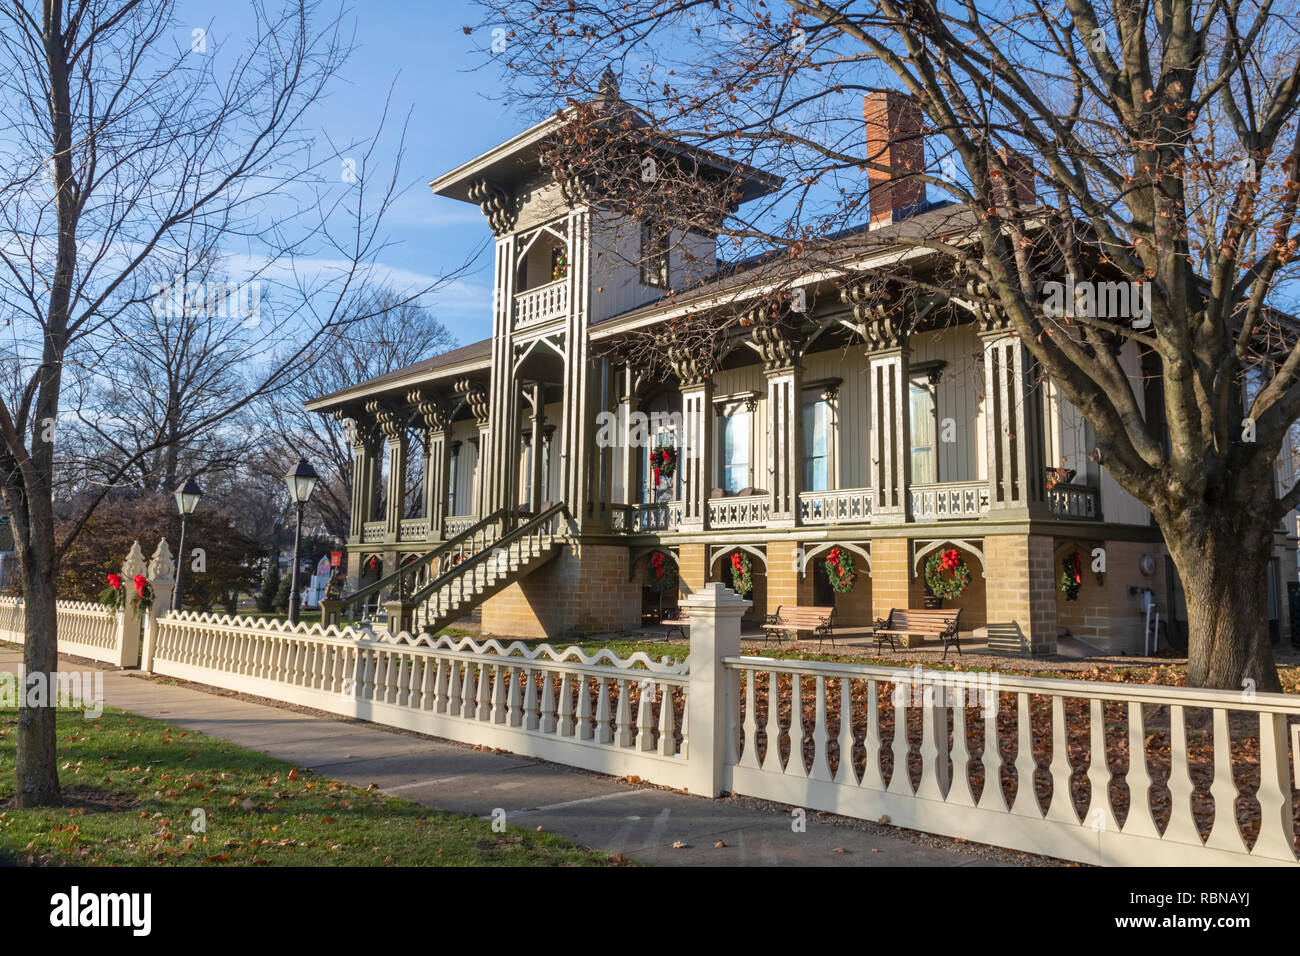 Marshall, Michigan - The Honolulu House Museum, operated by the Marshall Historical Society. Stock Photo